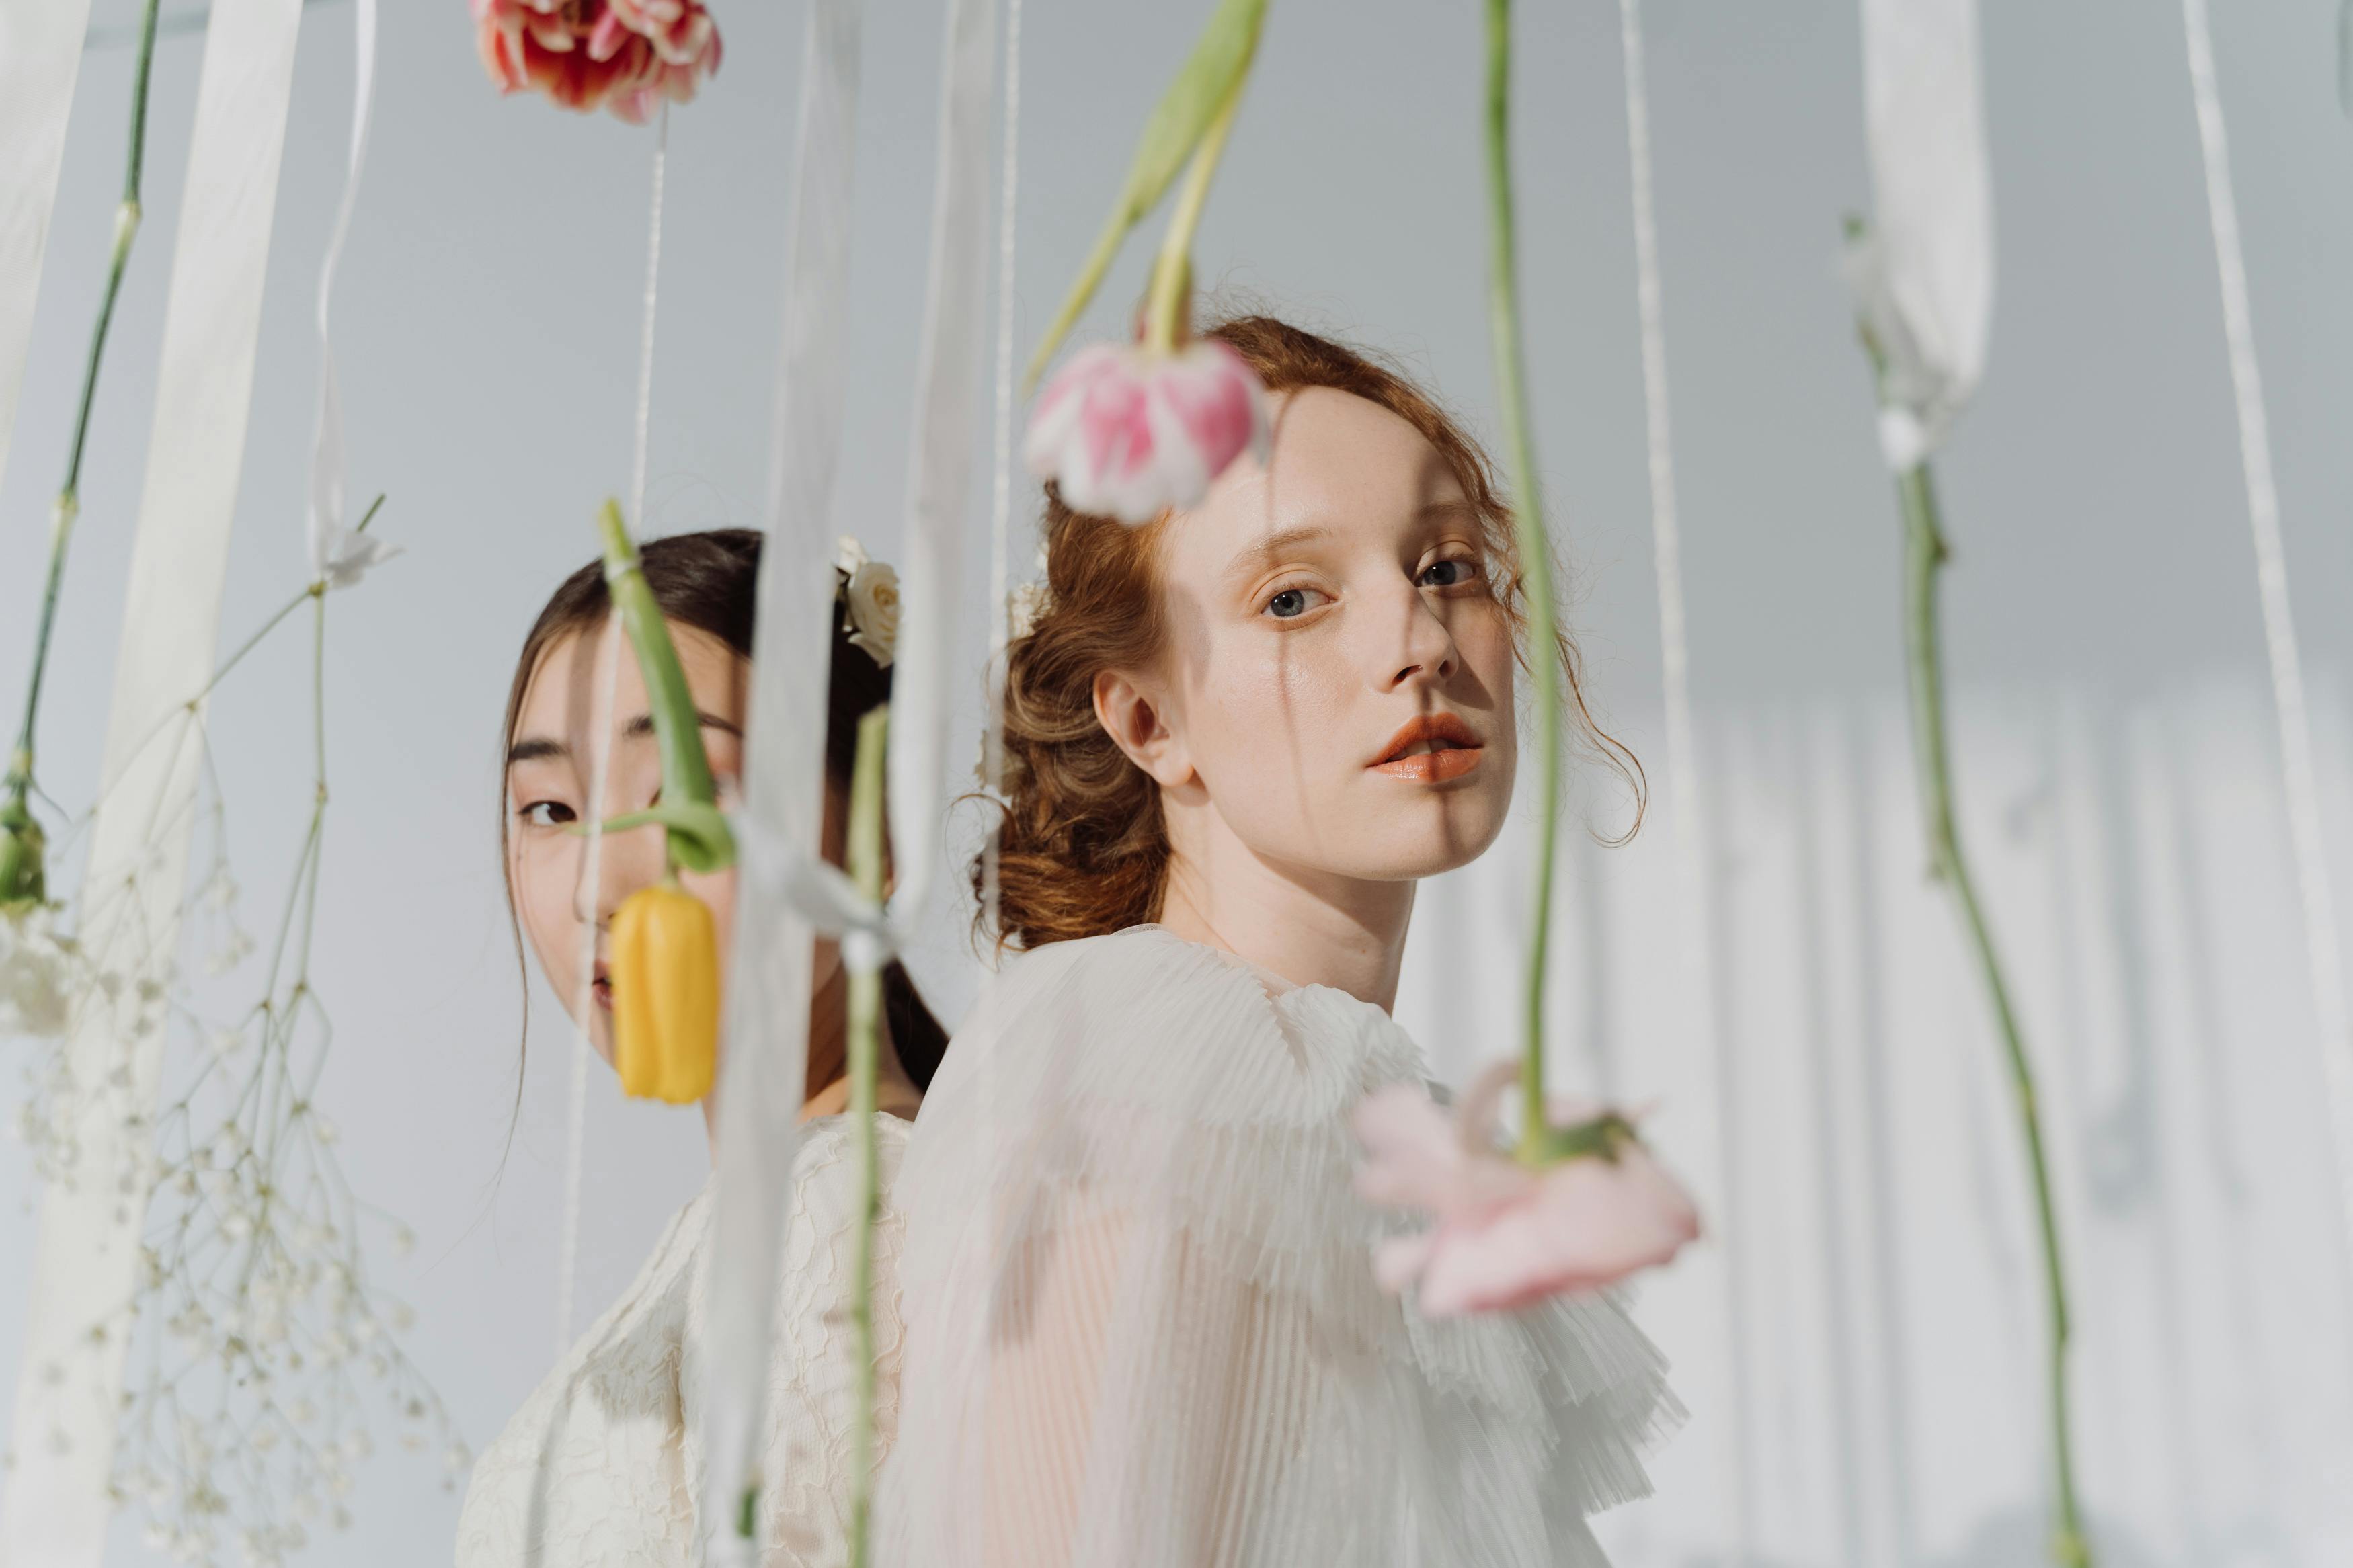 women in white dresses posing with flowers hanging upside down